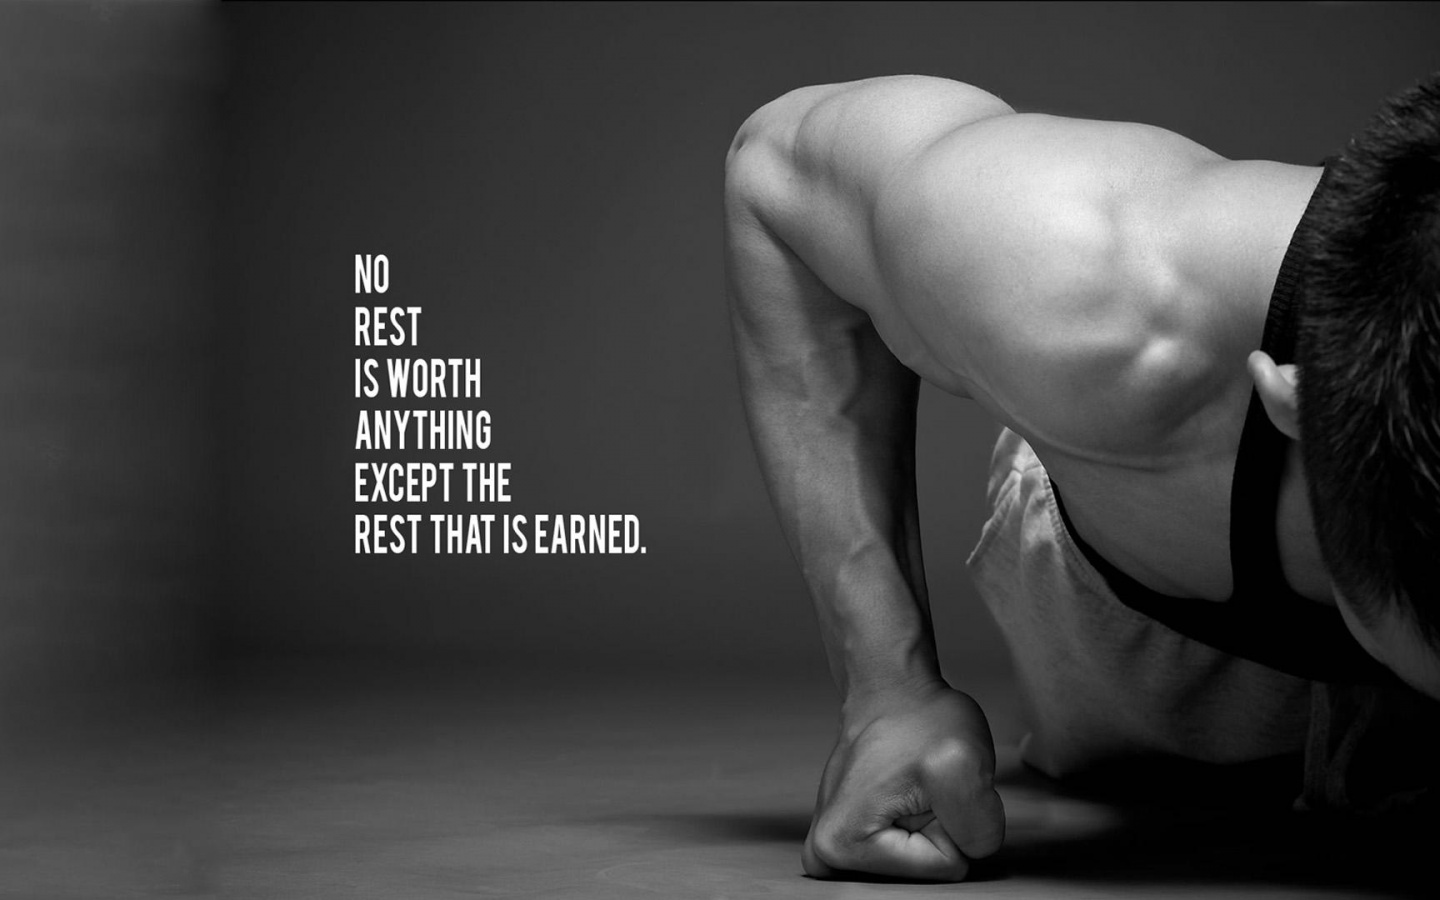 muay-thai-quote-wallpapers_33584_1440x900